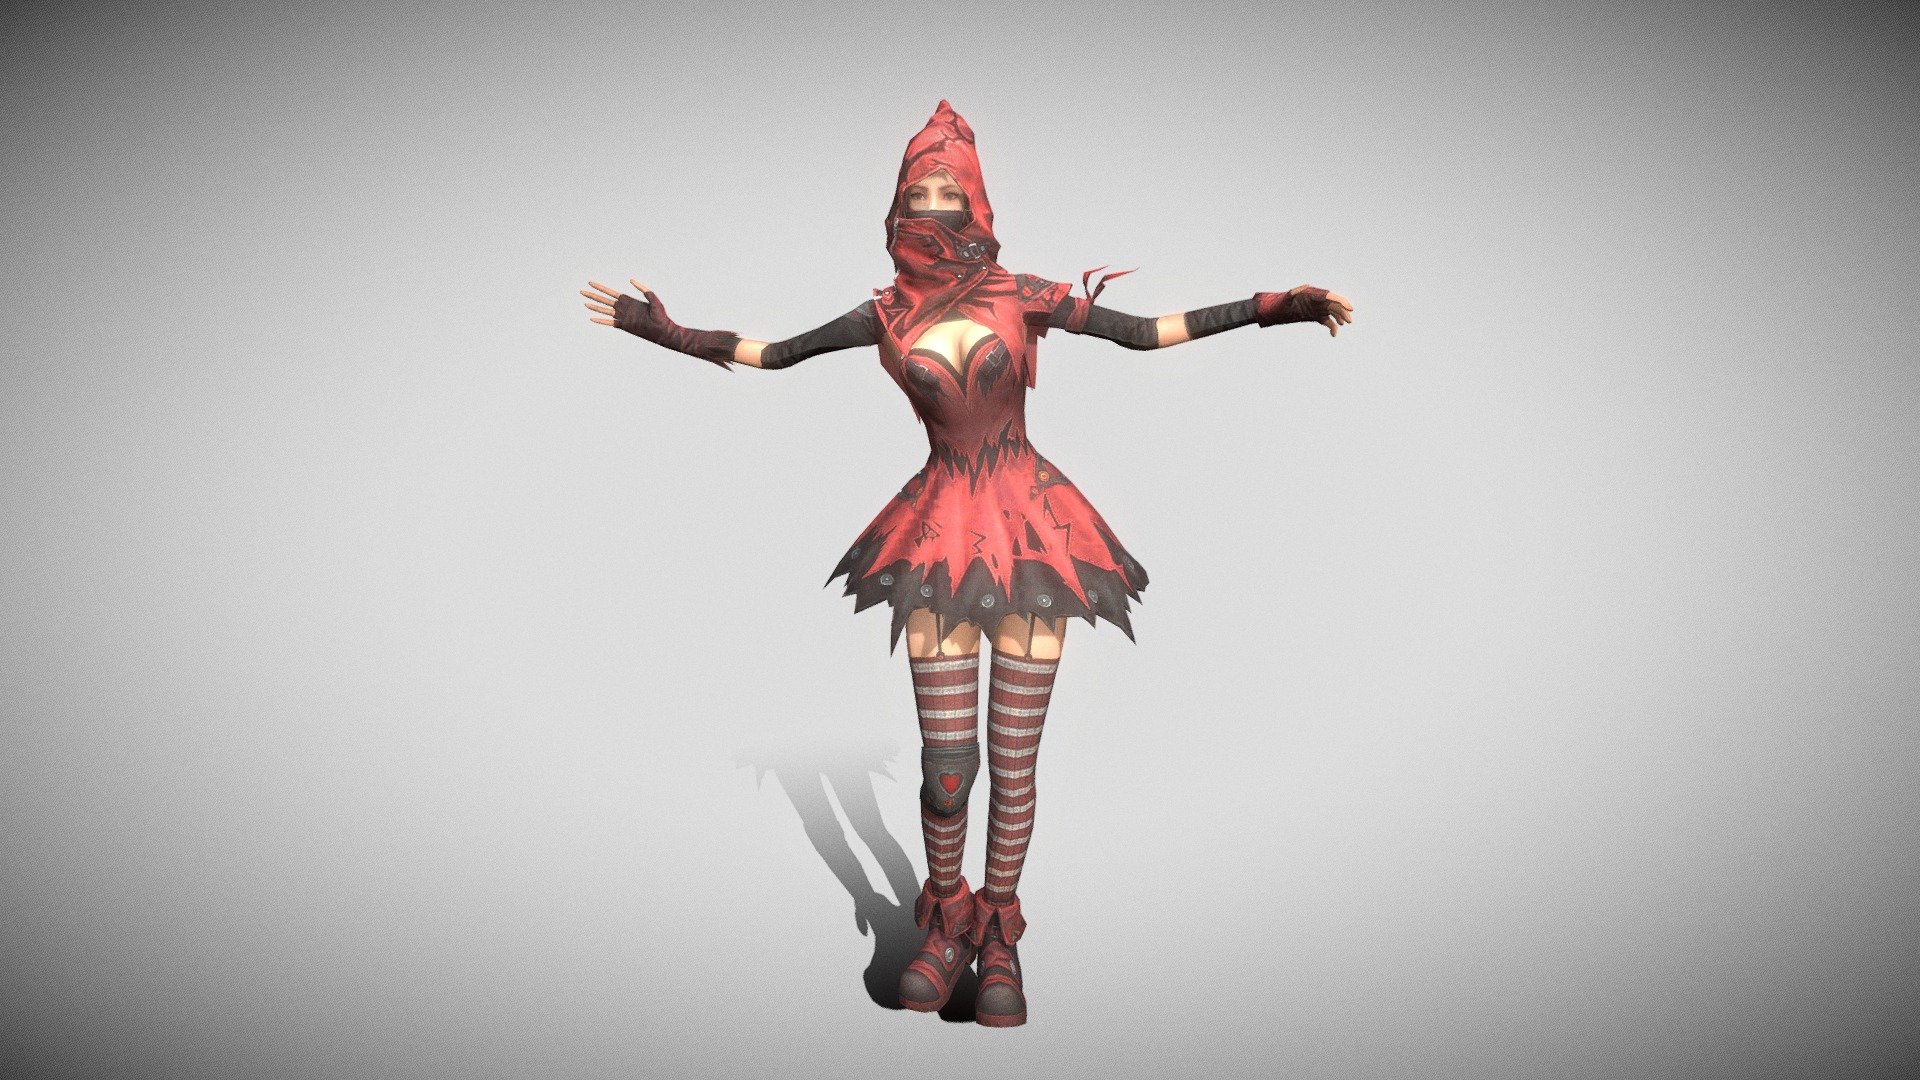 Elven Red Animated model [Free Fire 1st anniversary Free Dress] download in fbx rigged using ActorCore AccuRIG From Reallusion #AccuRIG

Download Free Accurate &lsquo;AccuRIG' Autorigger:

Main web page:
https://actorcore.reallusion.com/auto-rig

Direct download: Download

Tutorial: https://courses.reallusion.com/home/actorcore/accurig

Online Manual: https://manual.reallusion.com/ActorCore-AccuRIG-1/Content/ENU/1.0/01-Welcome/Welcome.htm

FAQ: https://actorcore.reallusion.com/learn-and-support/faq/accurig

Contact me On instagram for paid work:
https://www.instagram.com/samanffind/

My YouTube Channel:

Saman FF - Elven Red Animated Free Fire 3D character - Download Free 3D model by @samanffind (@samanffind) 3d model